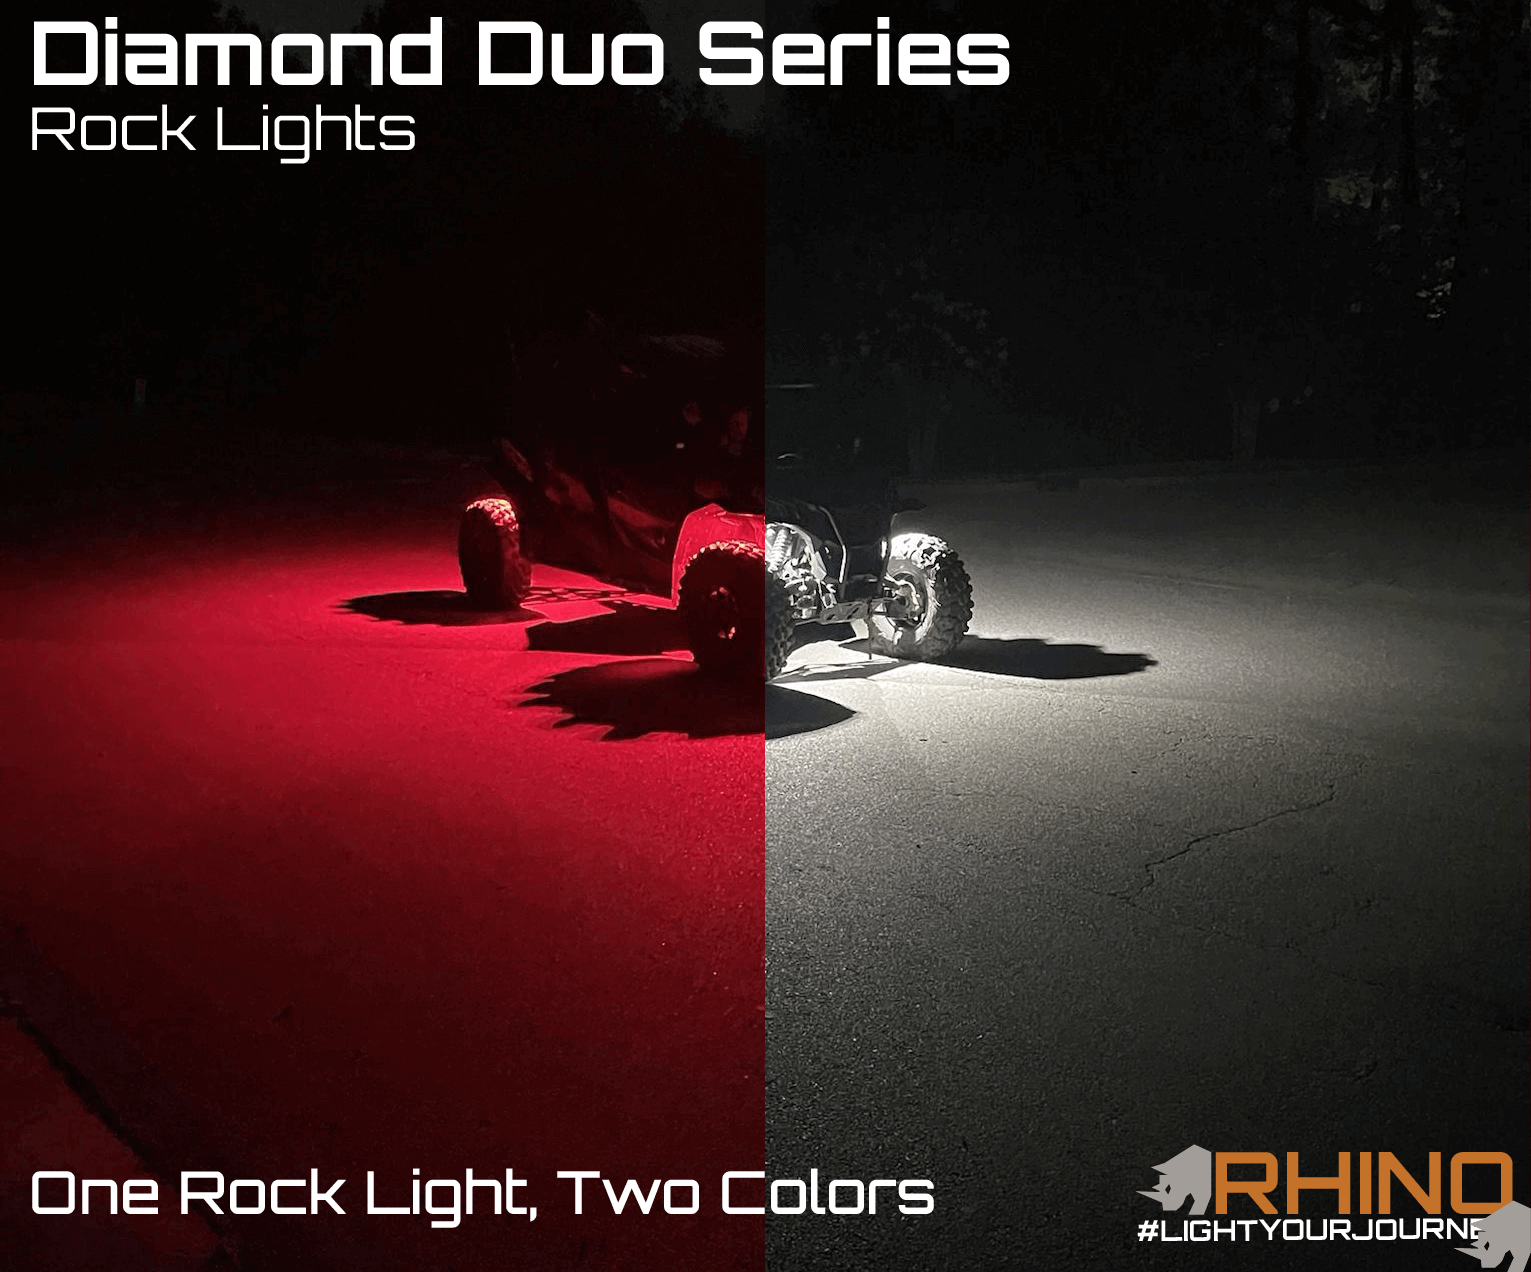 https://shop.rhinoledlights.com/images/watermarked/1/detailed/2/diamond_duo.png